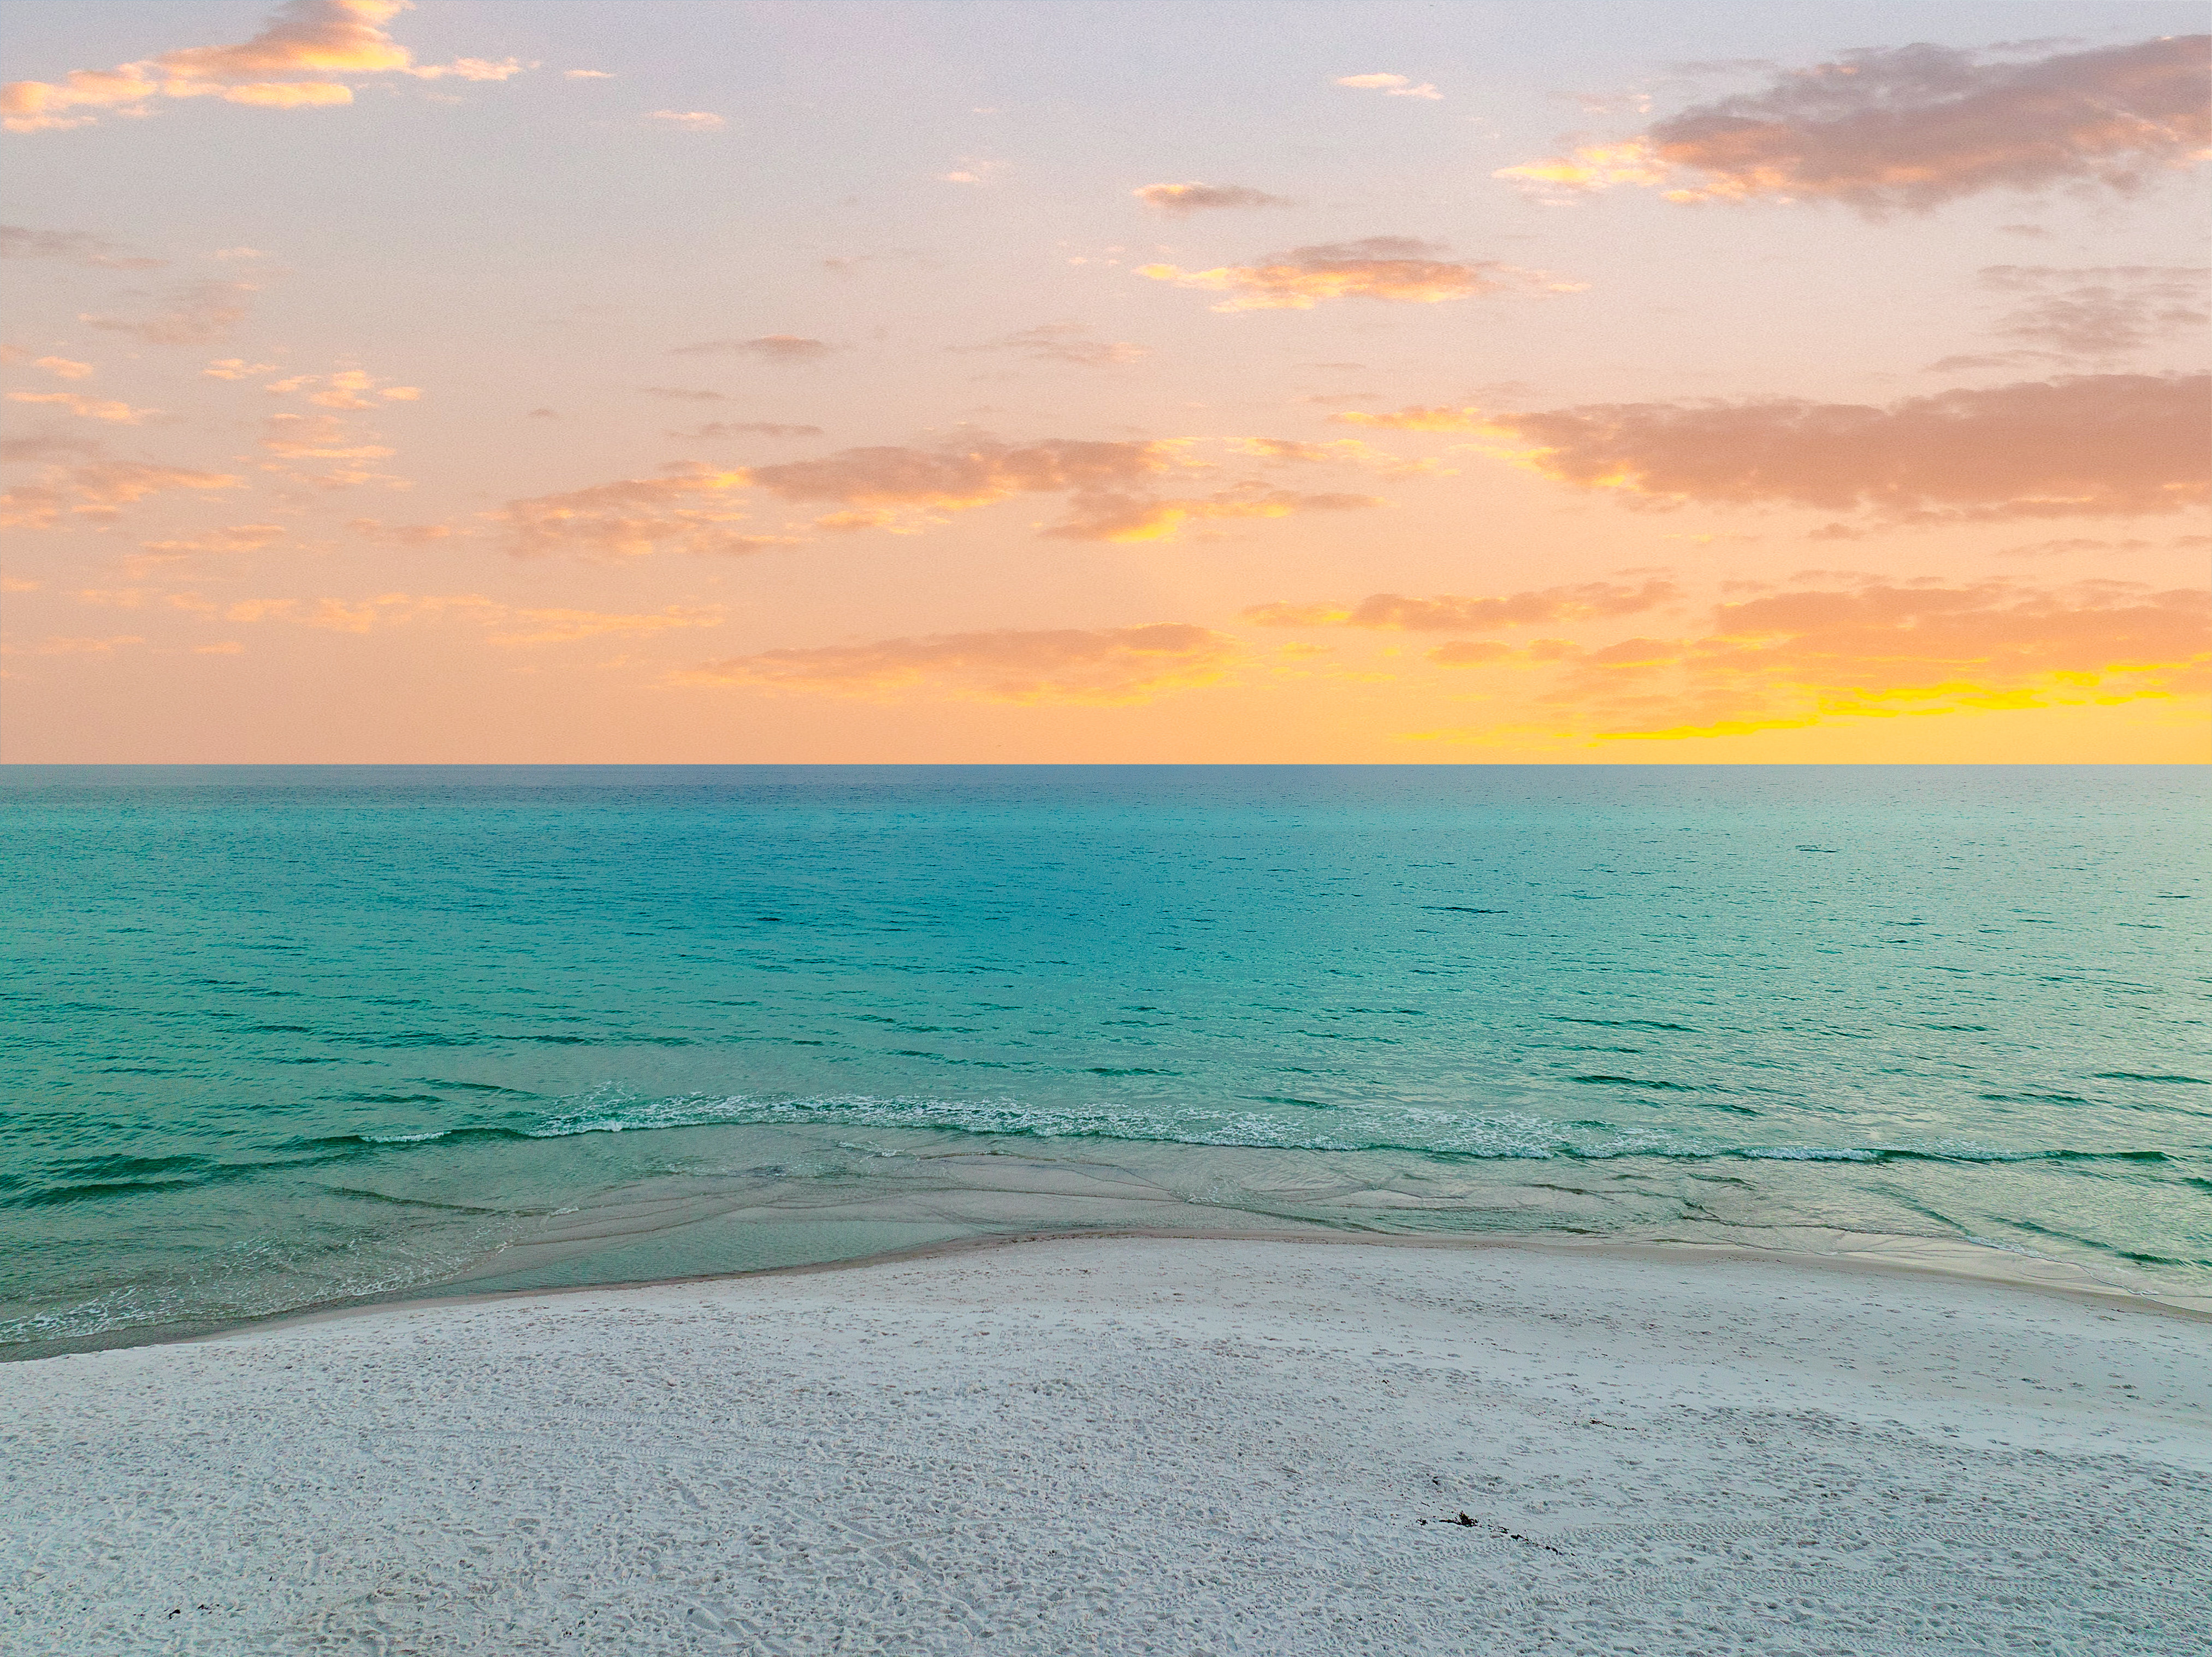 A serene sunset photo of the beach with white sand and brilliant blue gulf water